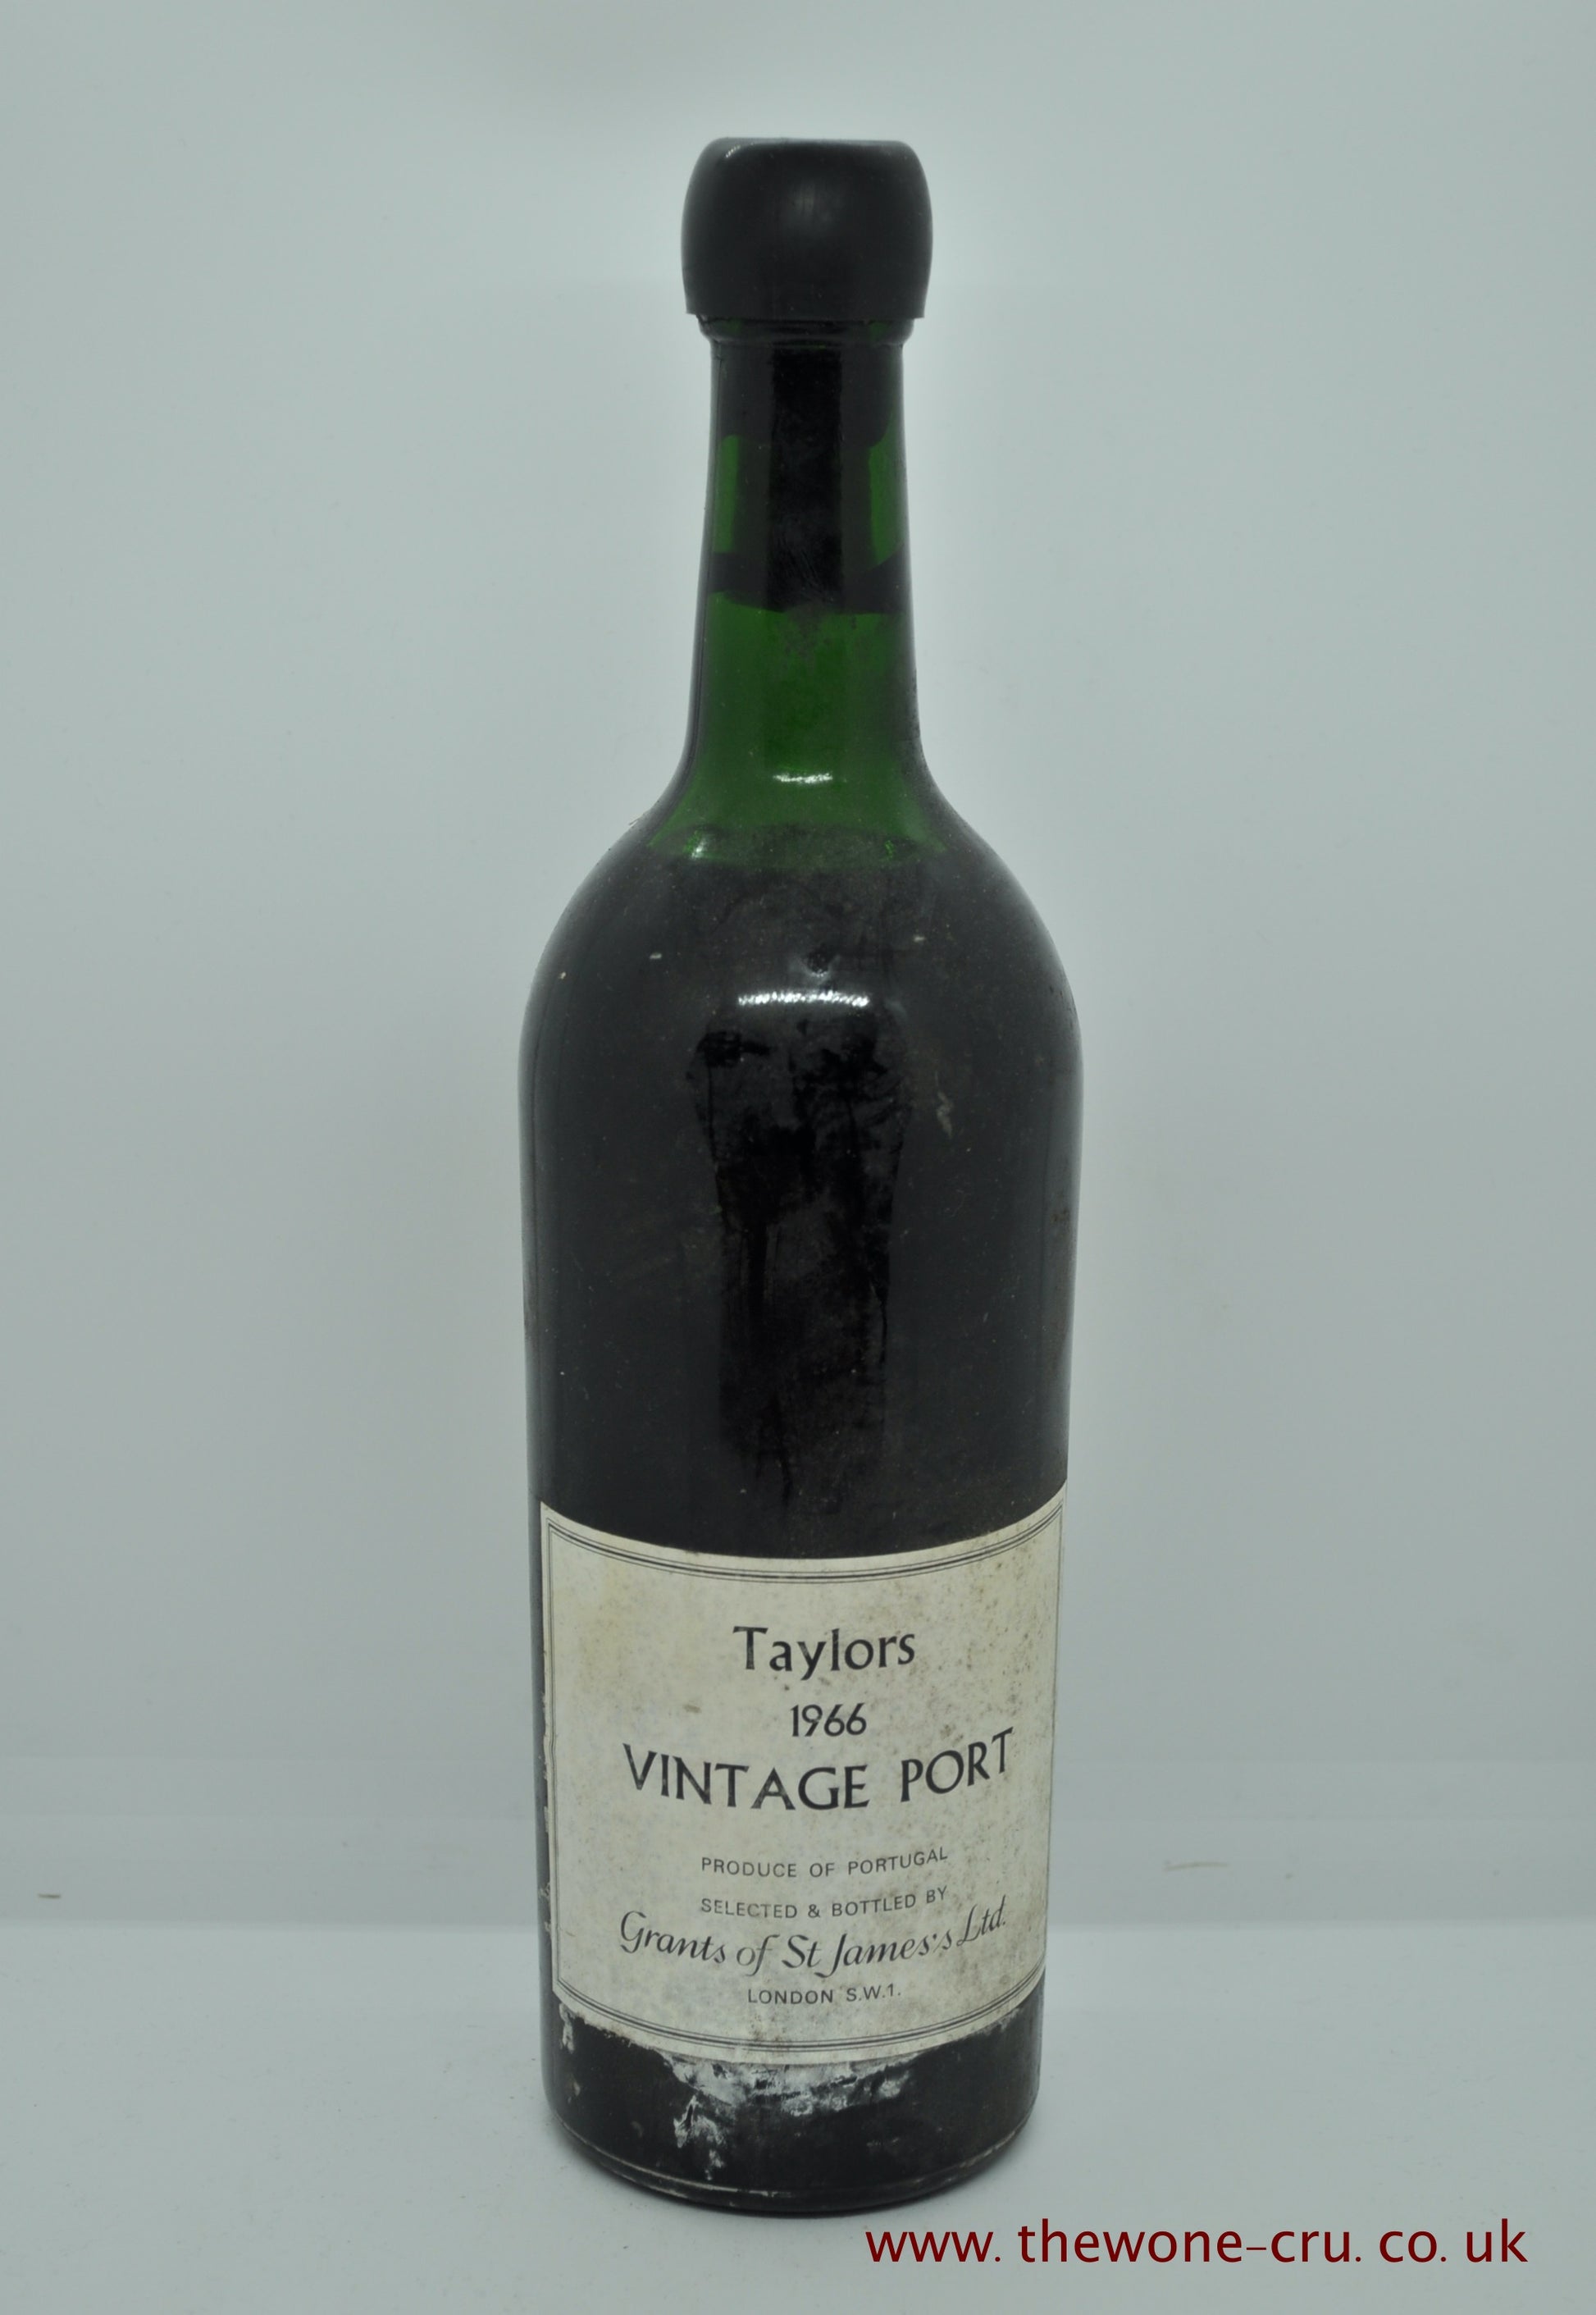 A bottle of 1966 vintage port wine. Taylors vintage Port. Portugal. The bottle is in good condition with the level being top shoulder. Immediate delivery. Free local delivery. Gift wrapping available.